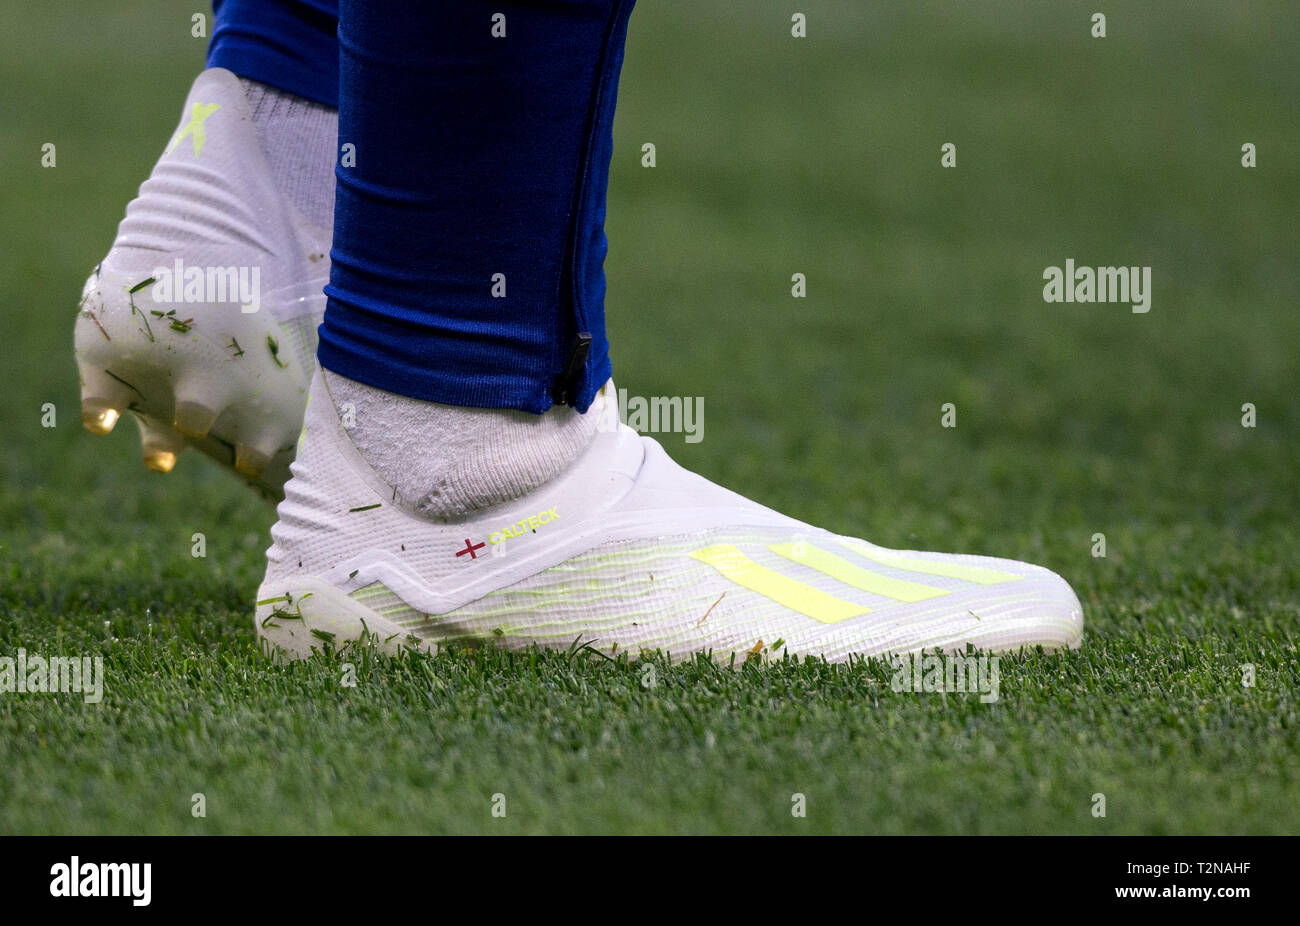 London, UK. 03rd Apr, 2019. The new Adidas X colour football boots of  Callum Hudson-Odoi of Chelsea displaying England flag and CALTECK during  the Premier League match between Chelsea and Brighton and